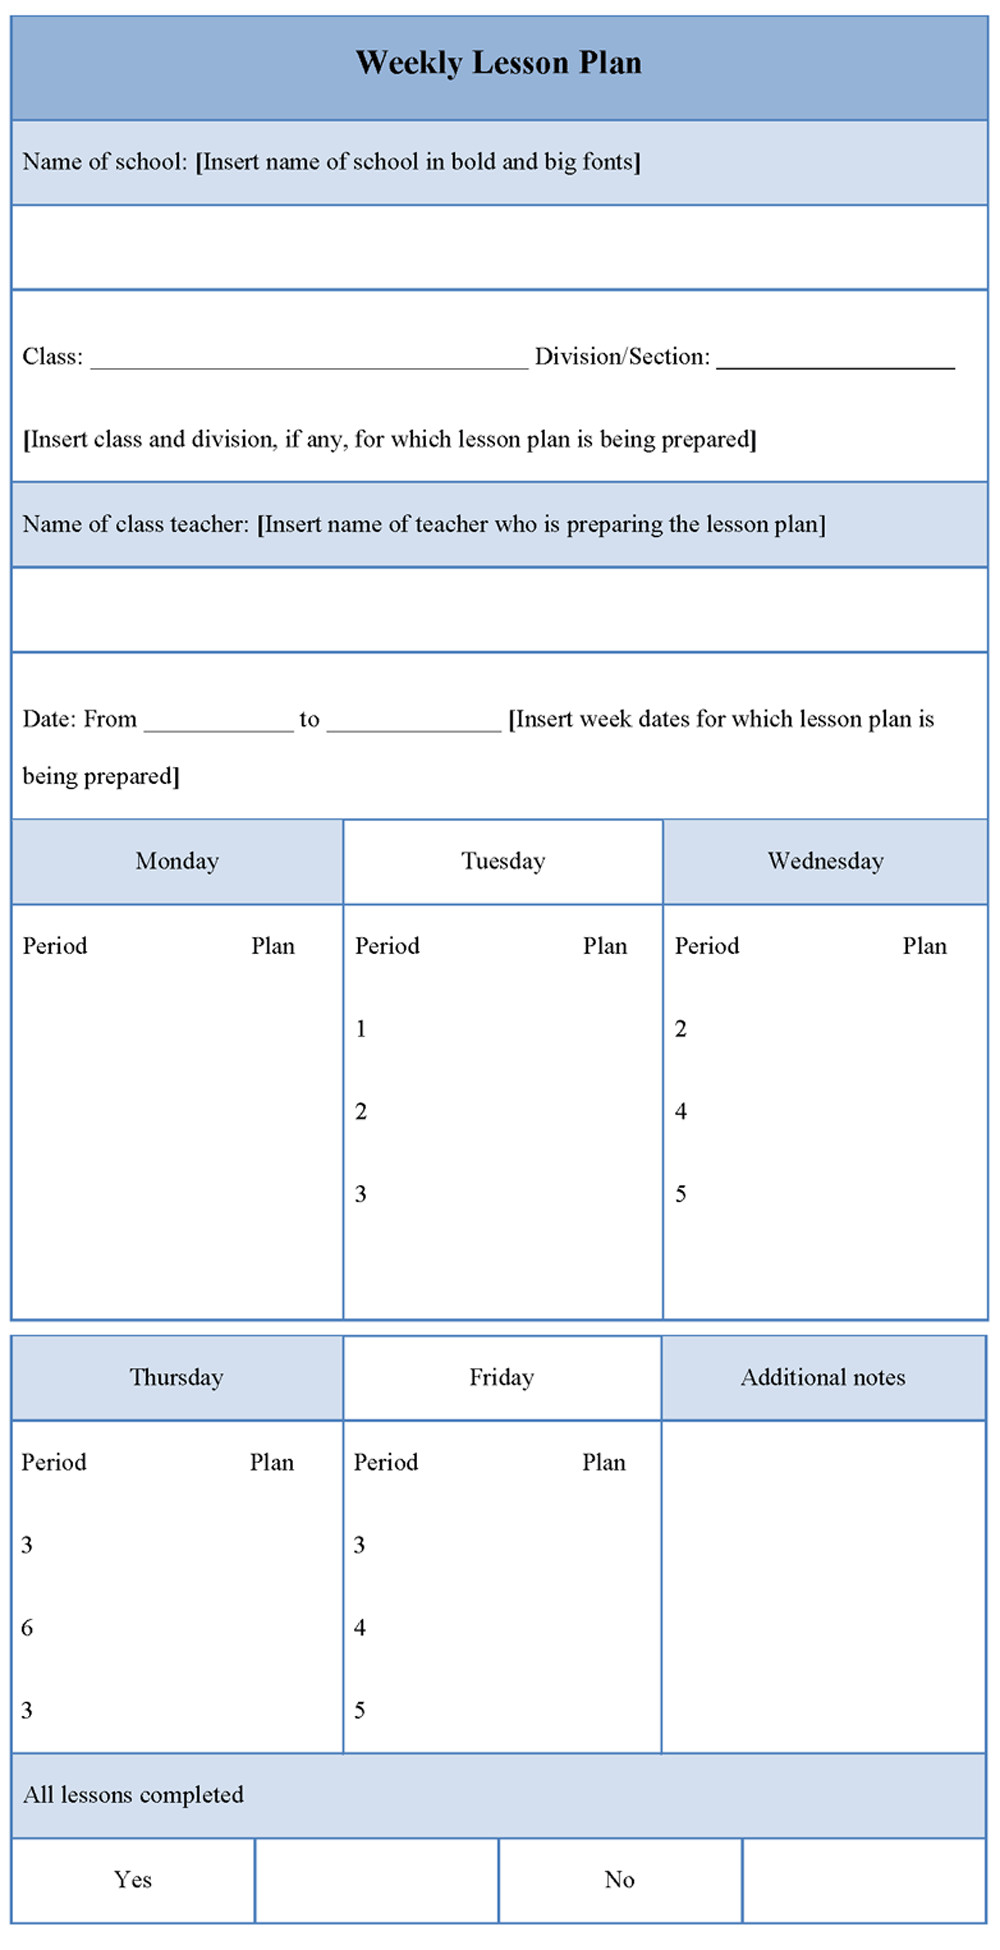 Weekly Lesson Plan Plan Template for Weekly Lesson Sample Of Weekly Lesson